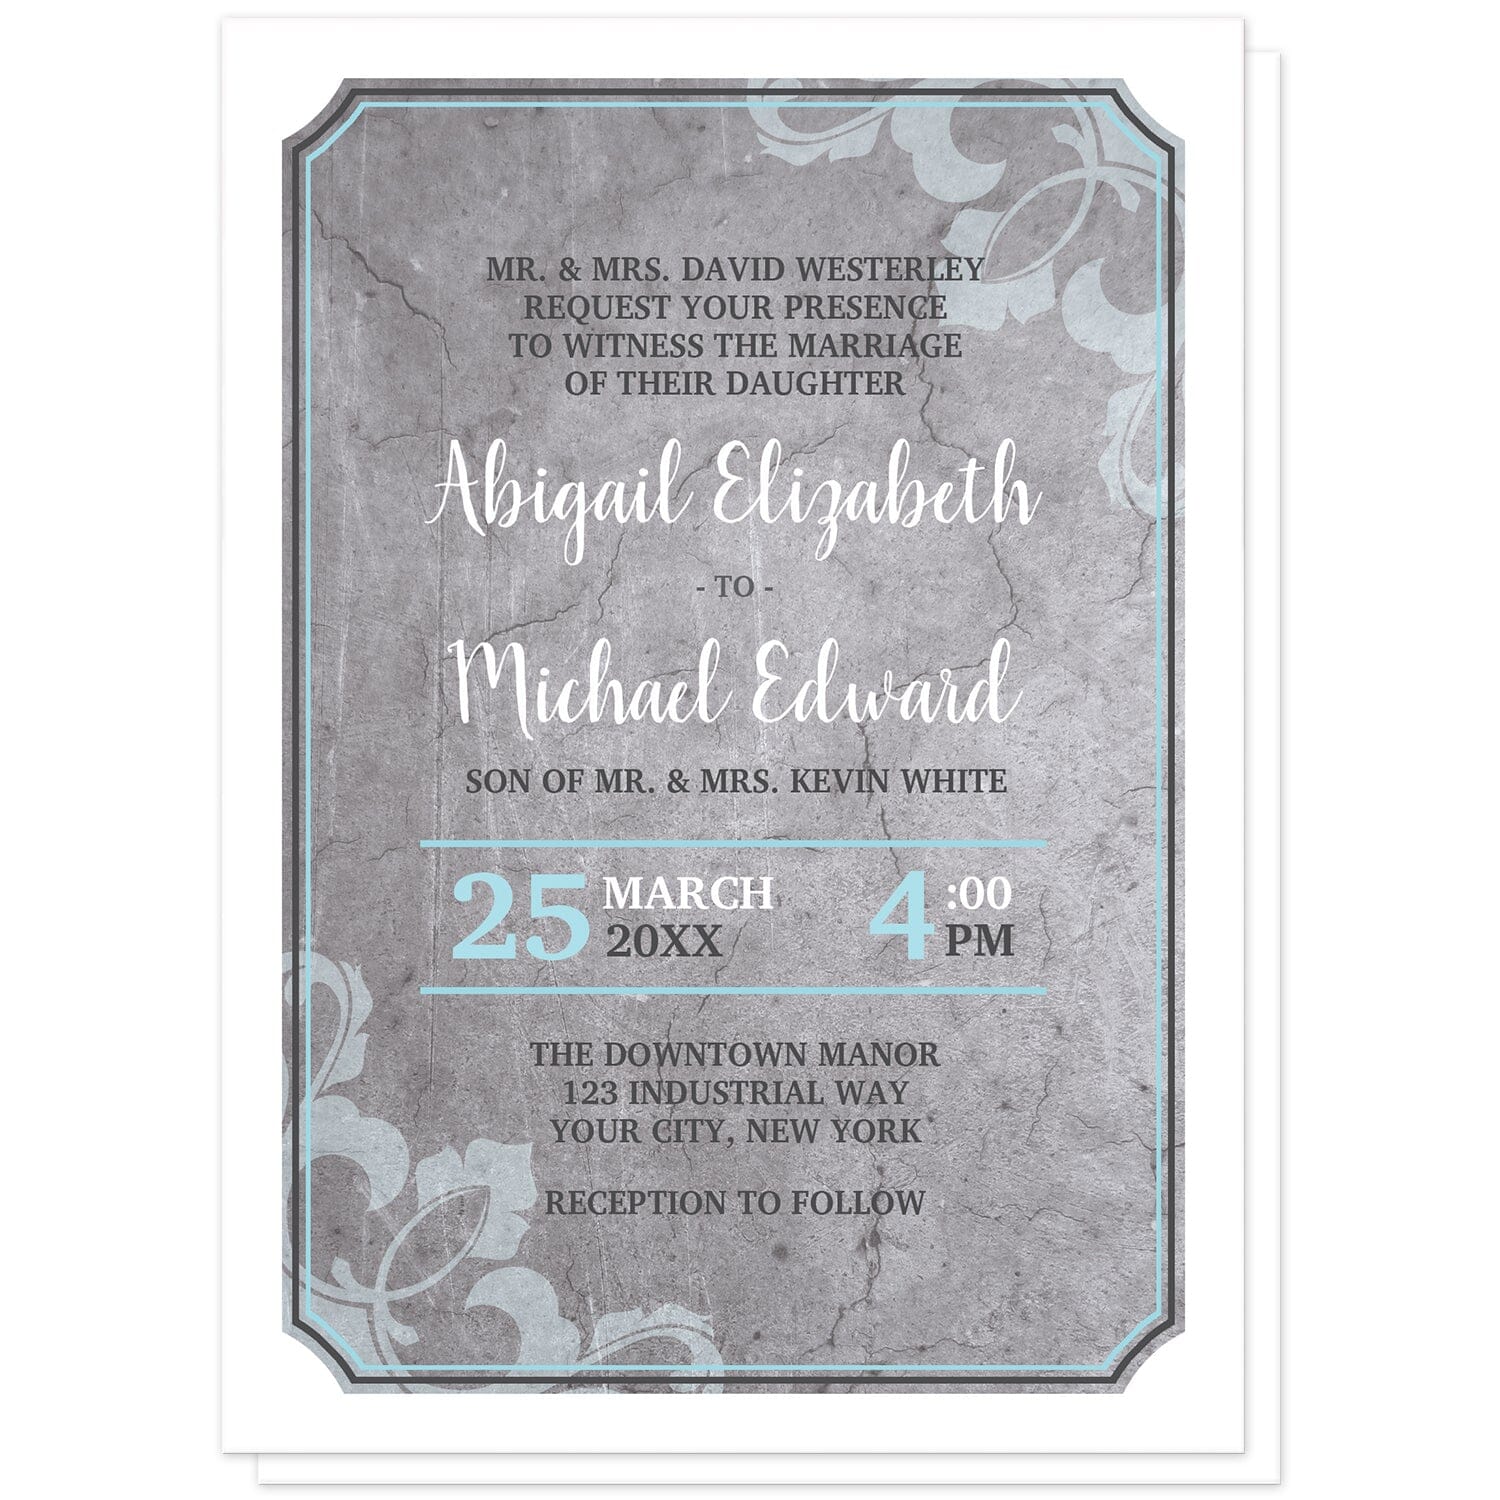 Industrial Aqua Gray Flourish Wedding Invitations at Artistically Invited. Invites with a gray concrete design with aqua blue, white, and dark gray typography over the concrete. They're framed with a thick white outer edge design. A light aqua flourish watermark overlays two opposing corners. The names are printed in a white script font over the concrete design while the remaining details are printed in a white, aqua blue, and dark gray all-capital letters serif font. 